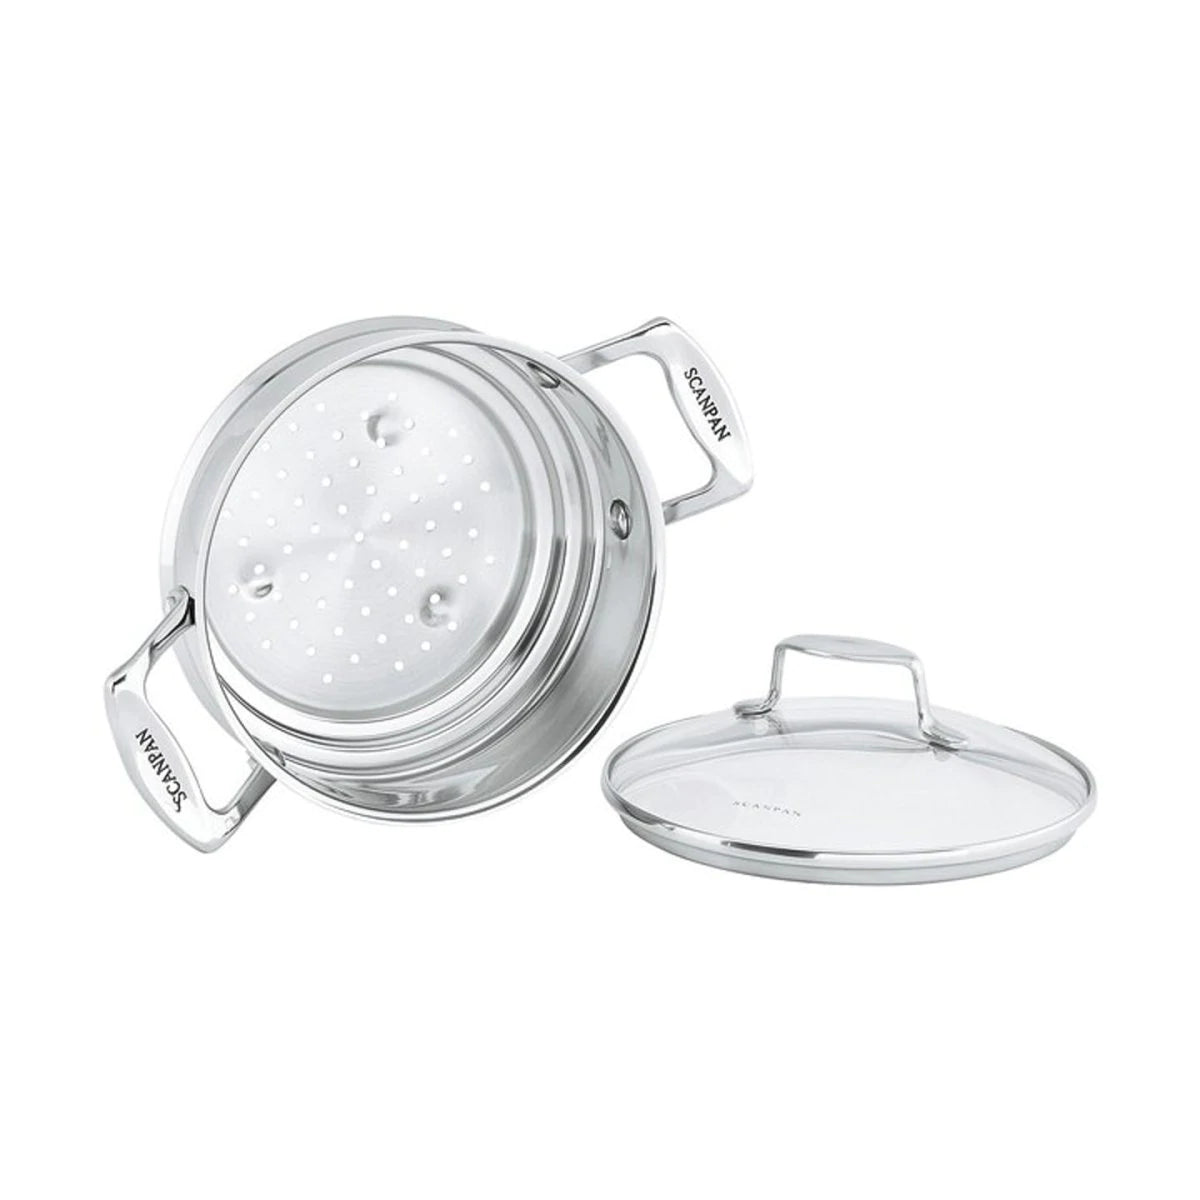 Scanpan Impact Stainless Steel Universal Steamer With Lid